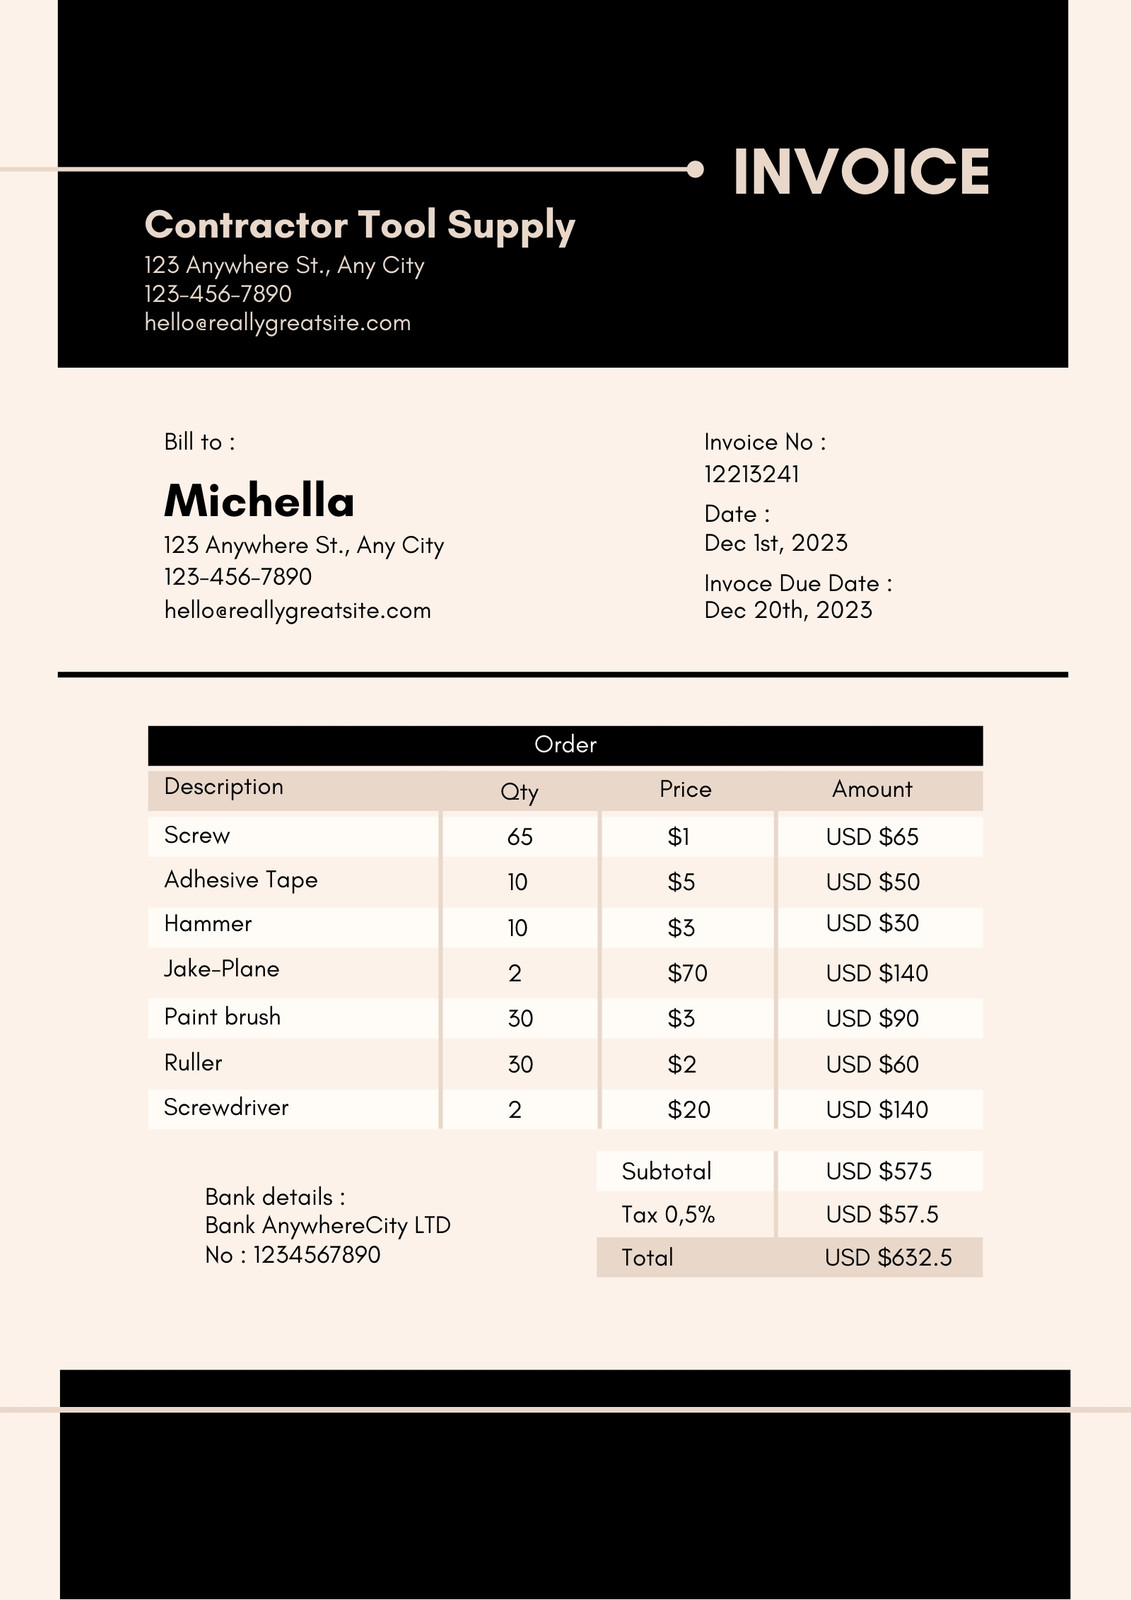 Page 2 - Free printable, customizable service invoice templates